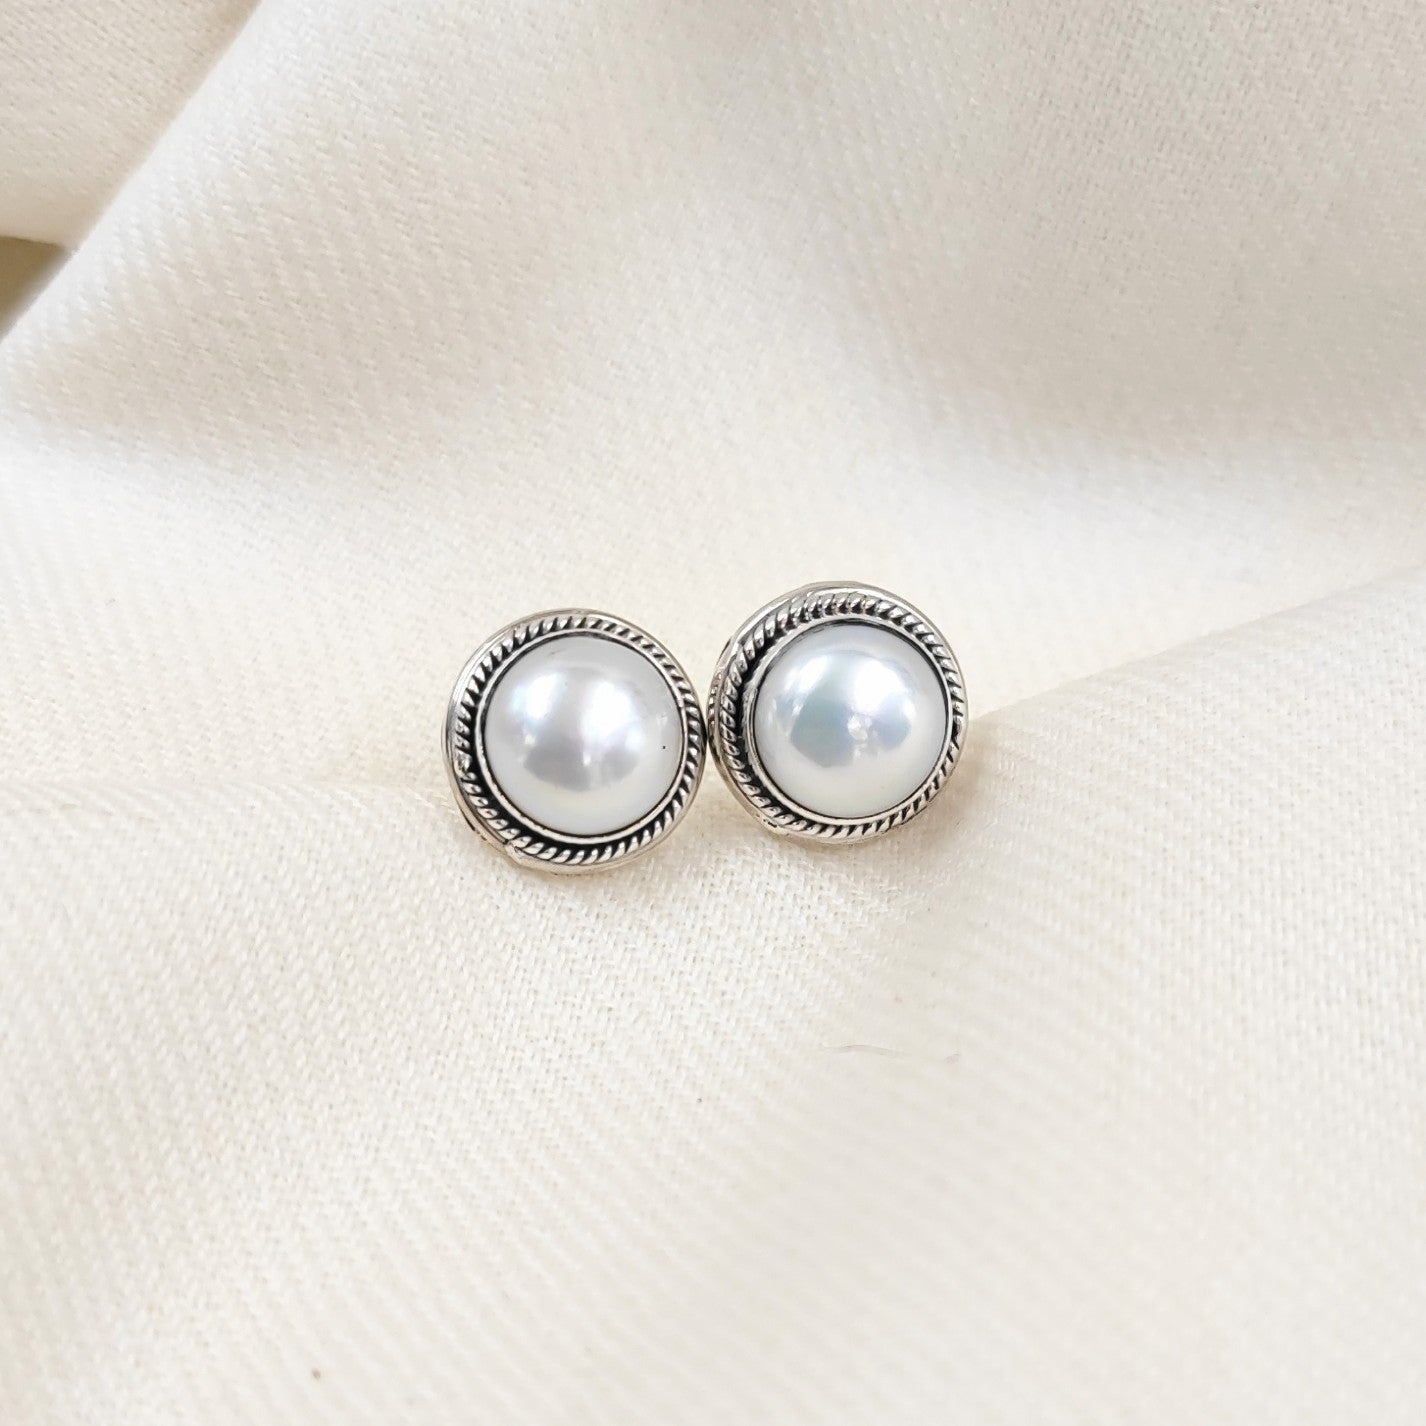 Silver Jewelry Earrings by Jauhri 92.5 Silver - Round Pearl Studs Big